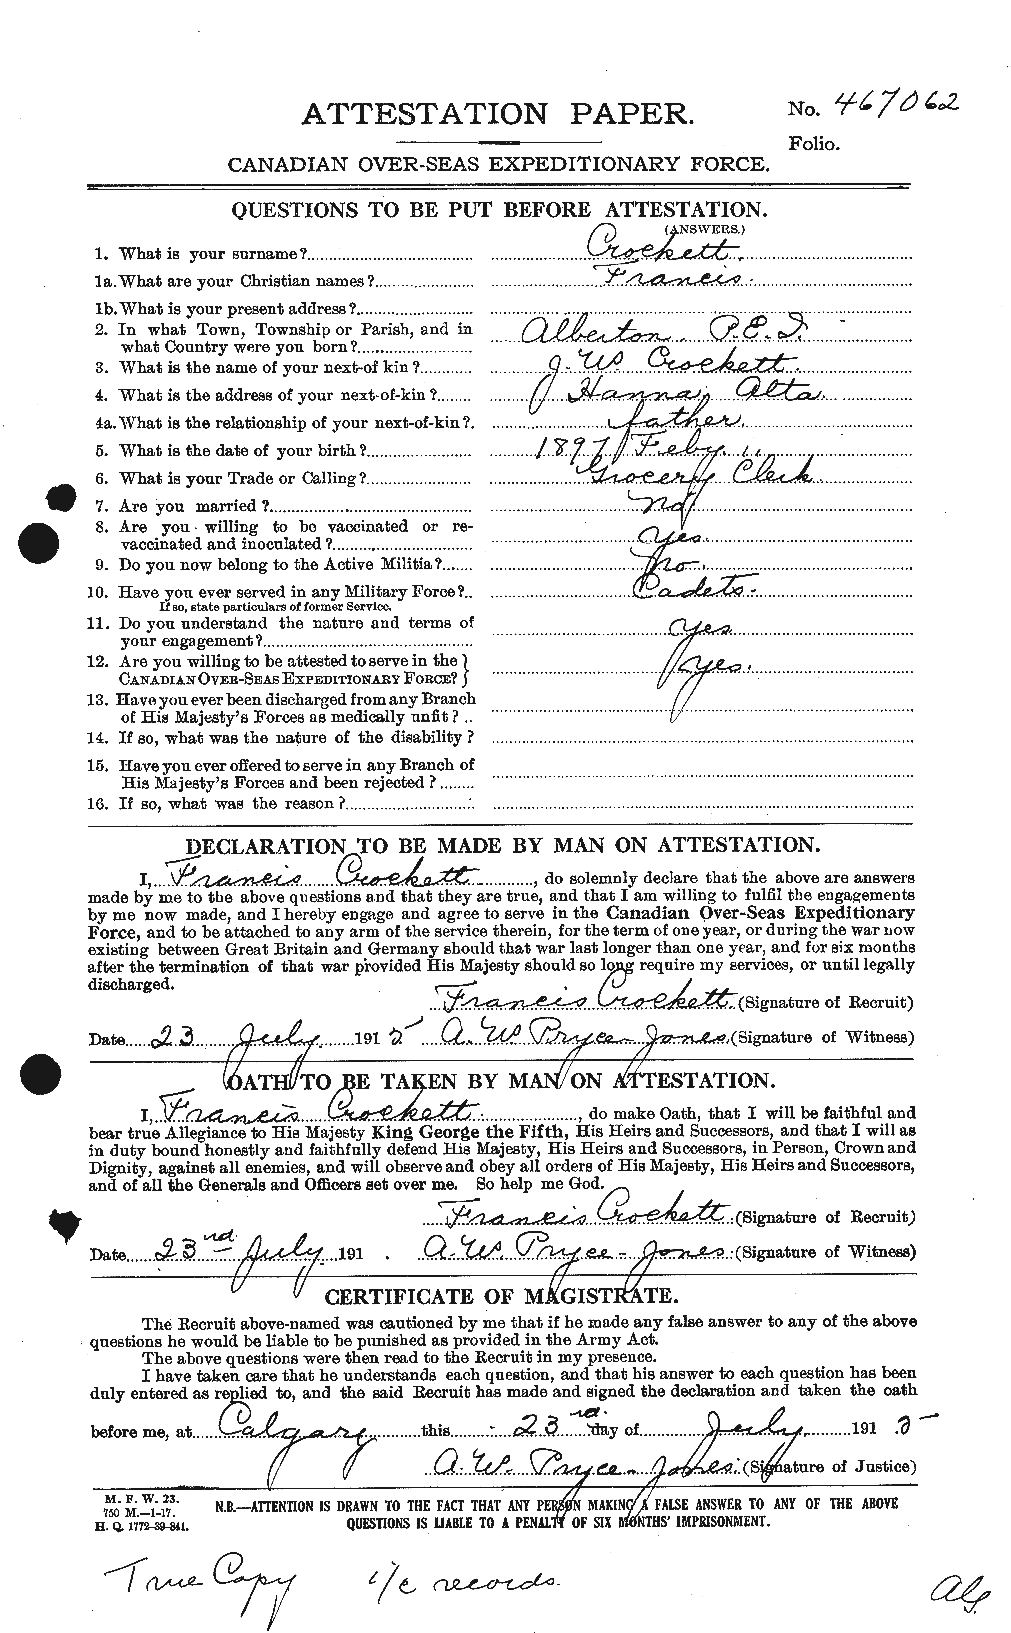 Personnel Records of the First World War - CEF 064714a